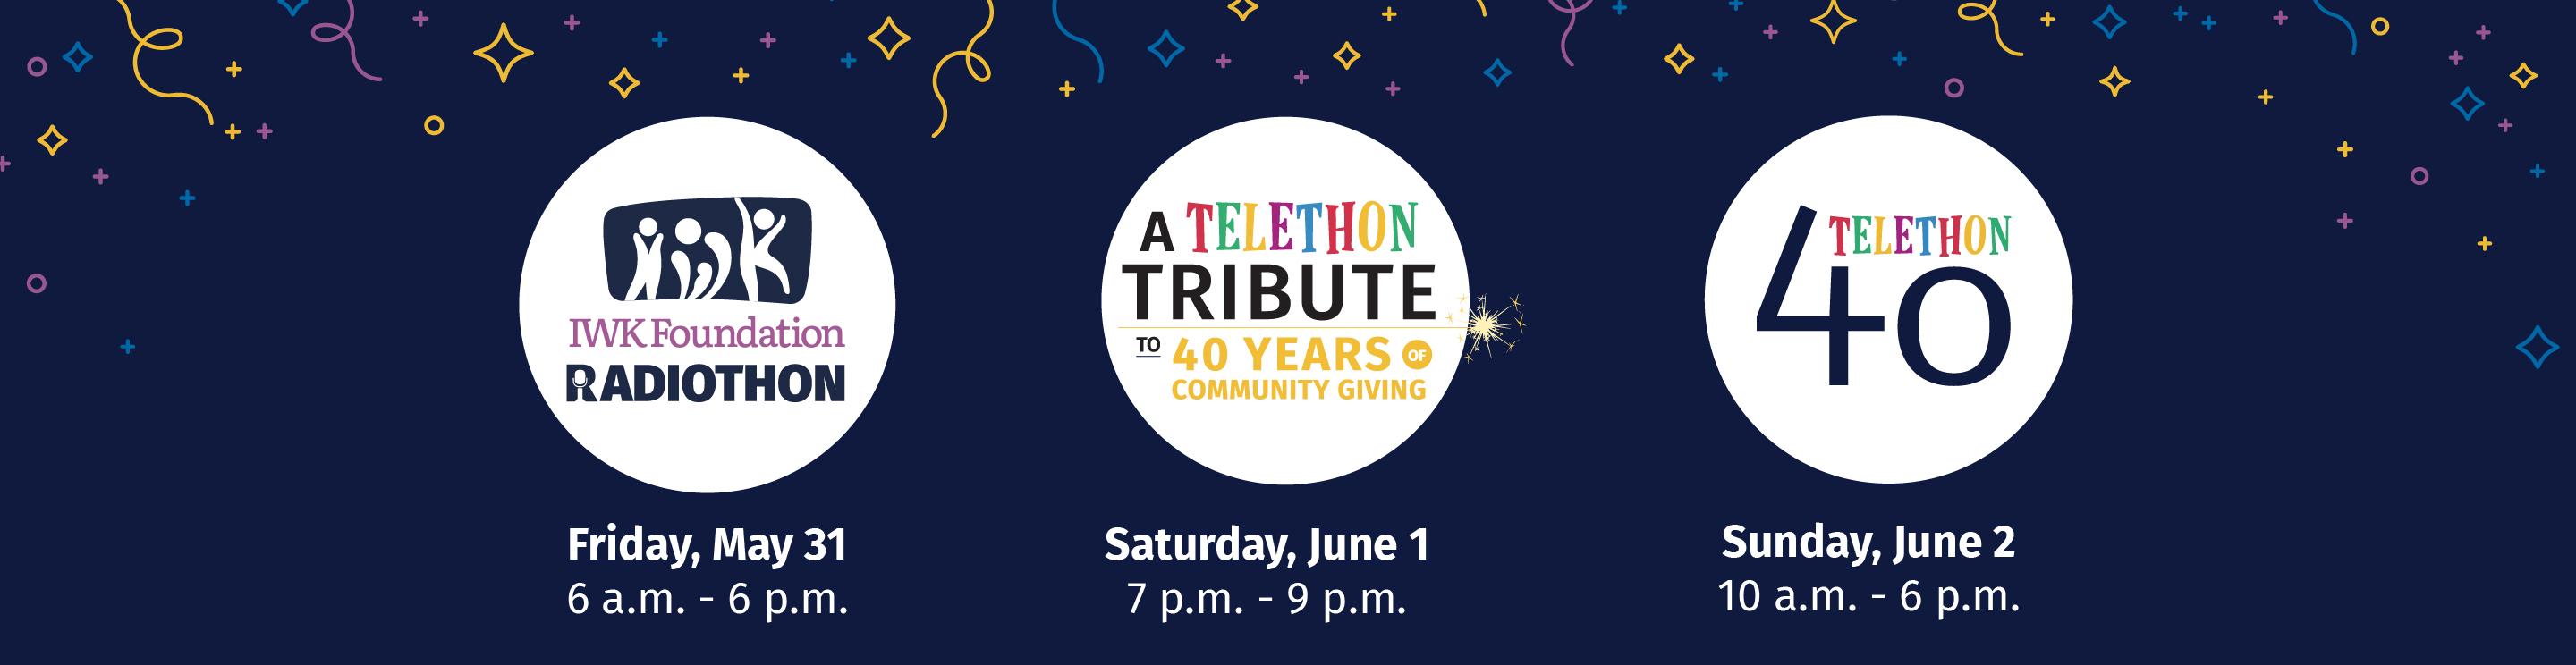 40th anniversary web banner with Radiothon, Telethon and Tribute Show logos